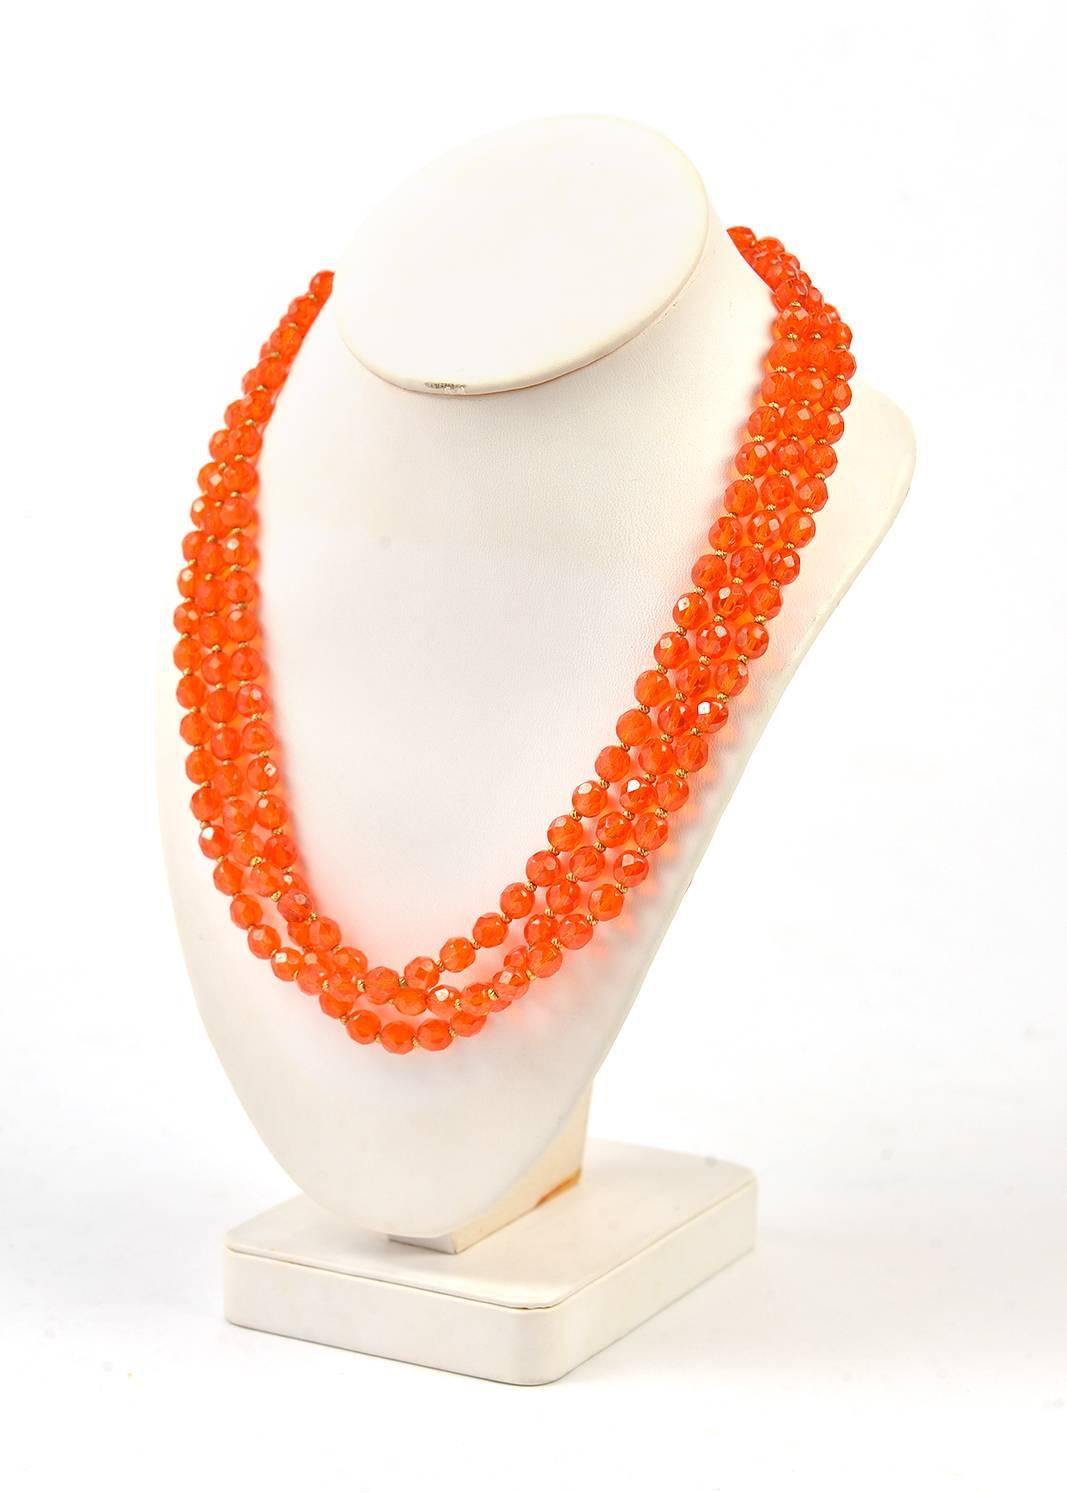 1960s Hattie Carnegie Tangerine Glass Bead Necklace and Earrings In Excellent Condition For Sale In Houston, TX